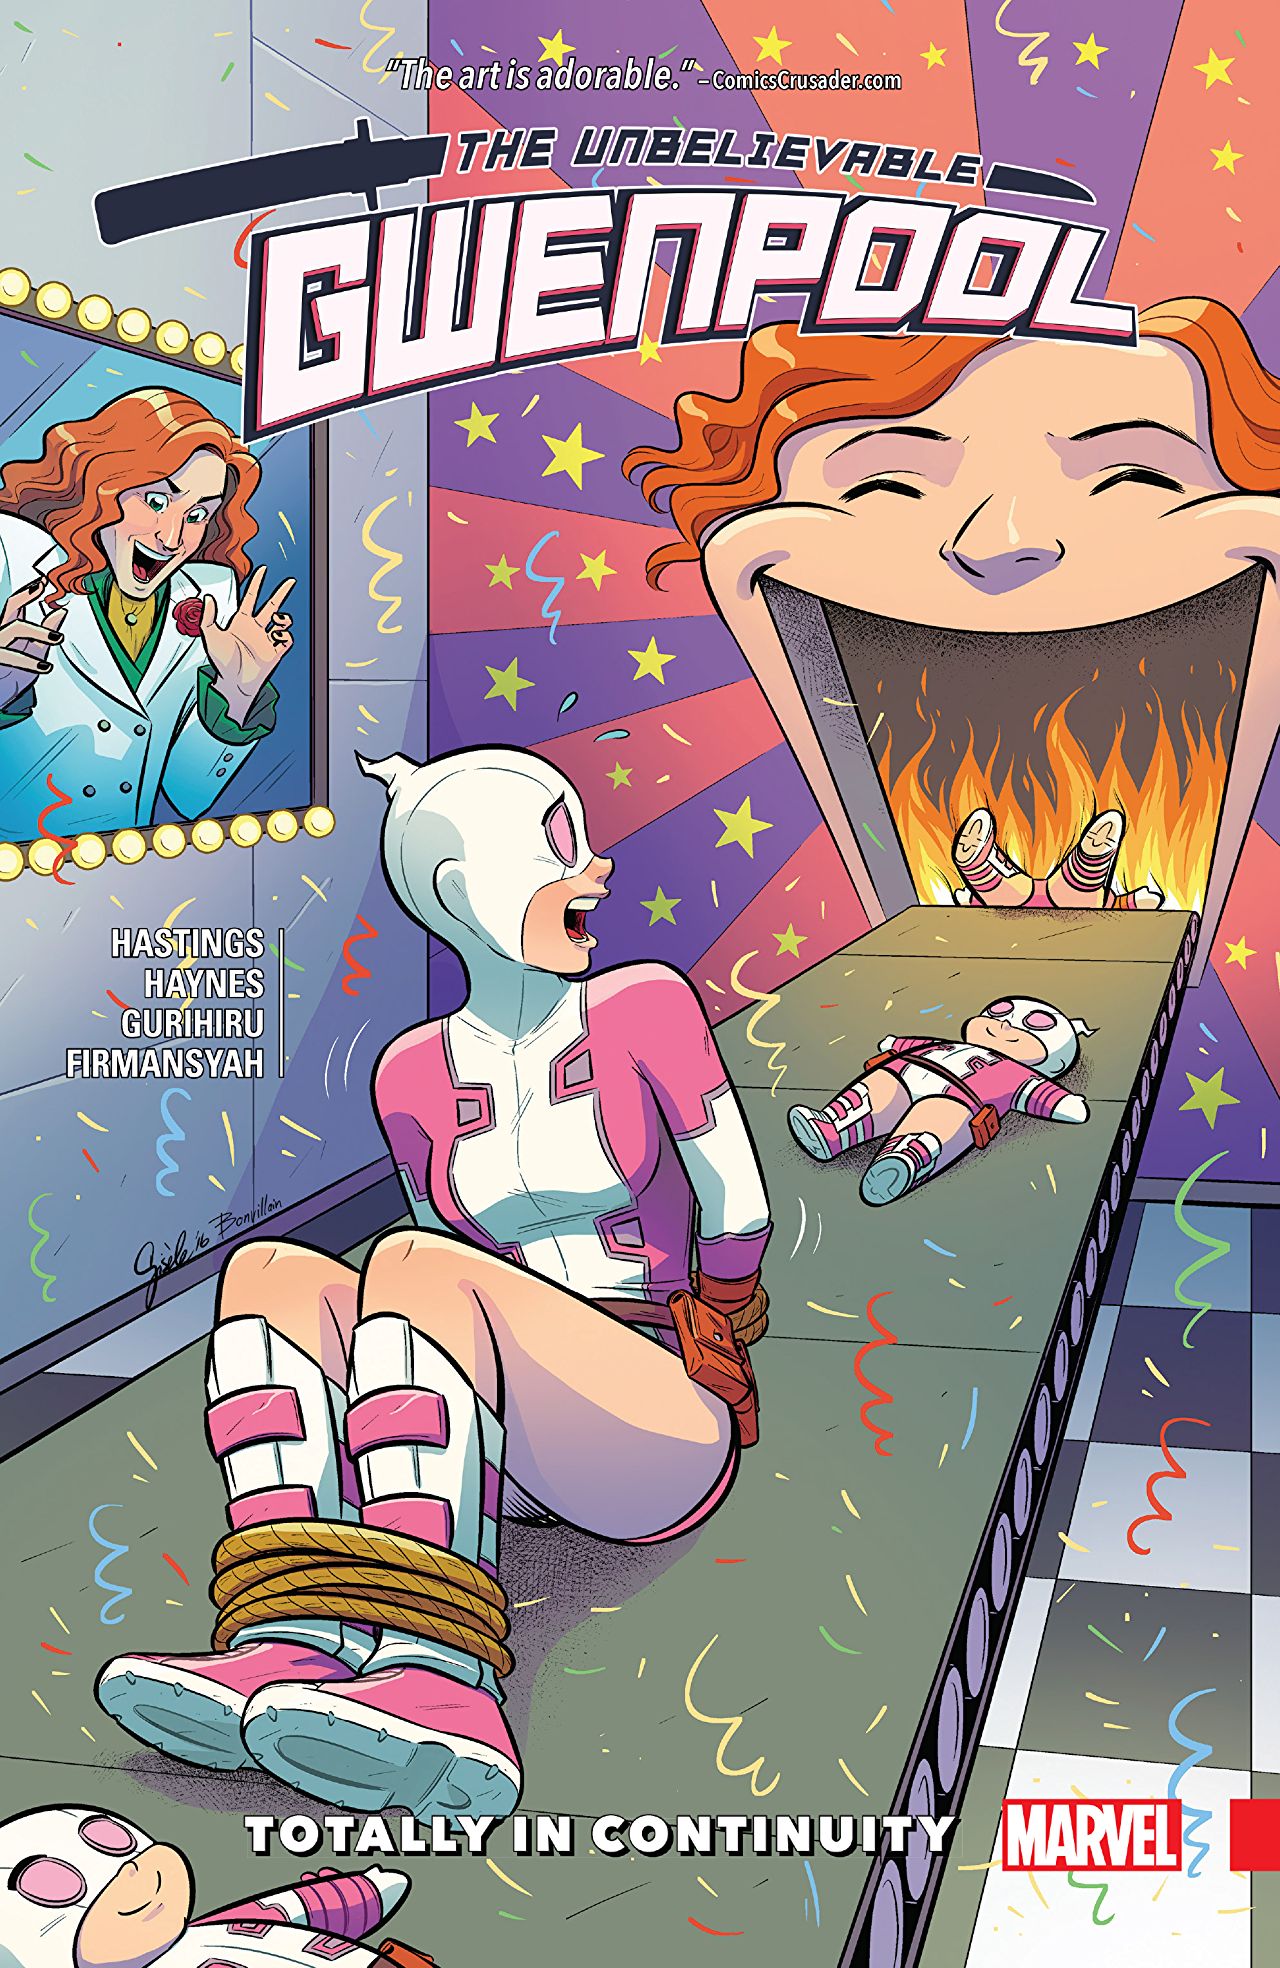 'The Unbelievable Gwenpool Vol. 3: Totally in Continuity' review: Meta, endearing, and funny